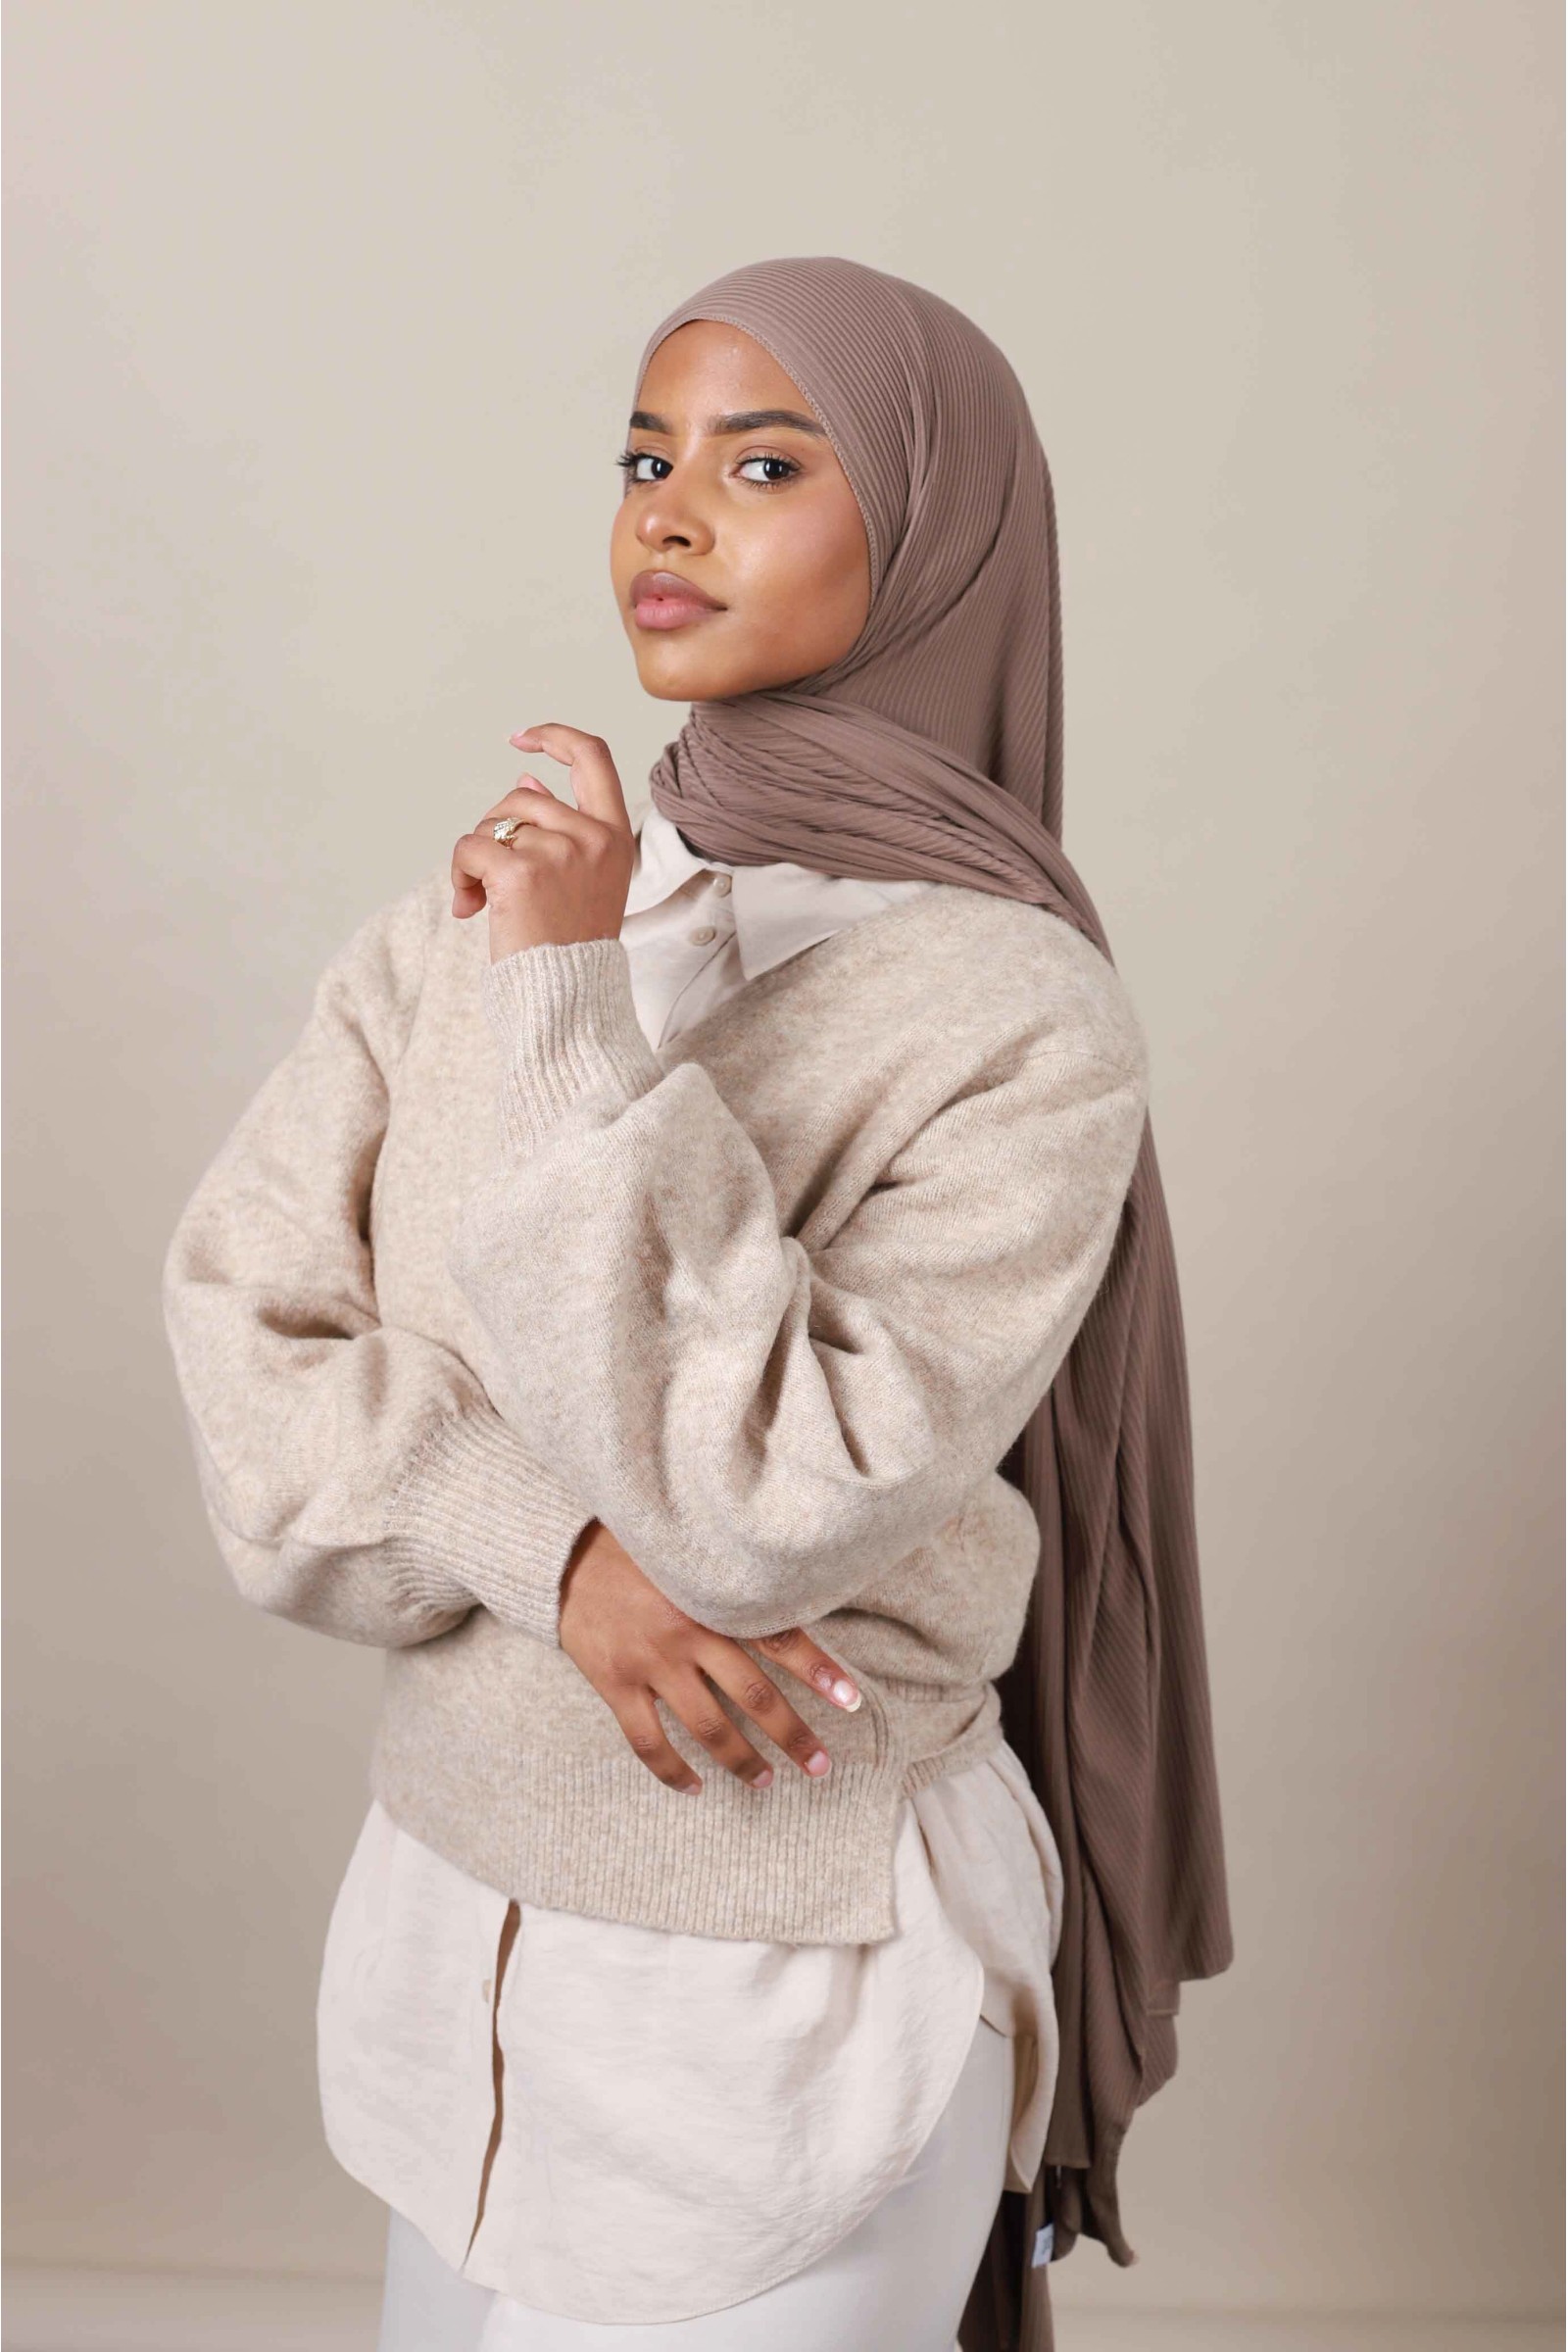 ribbed hijab jersey for everyday wear, inexpensive hijab for women